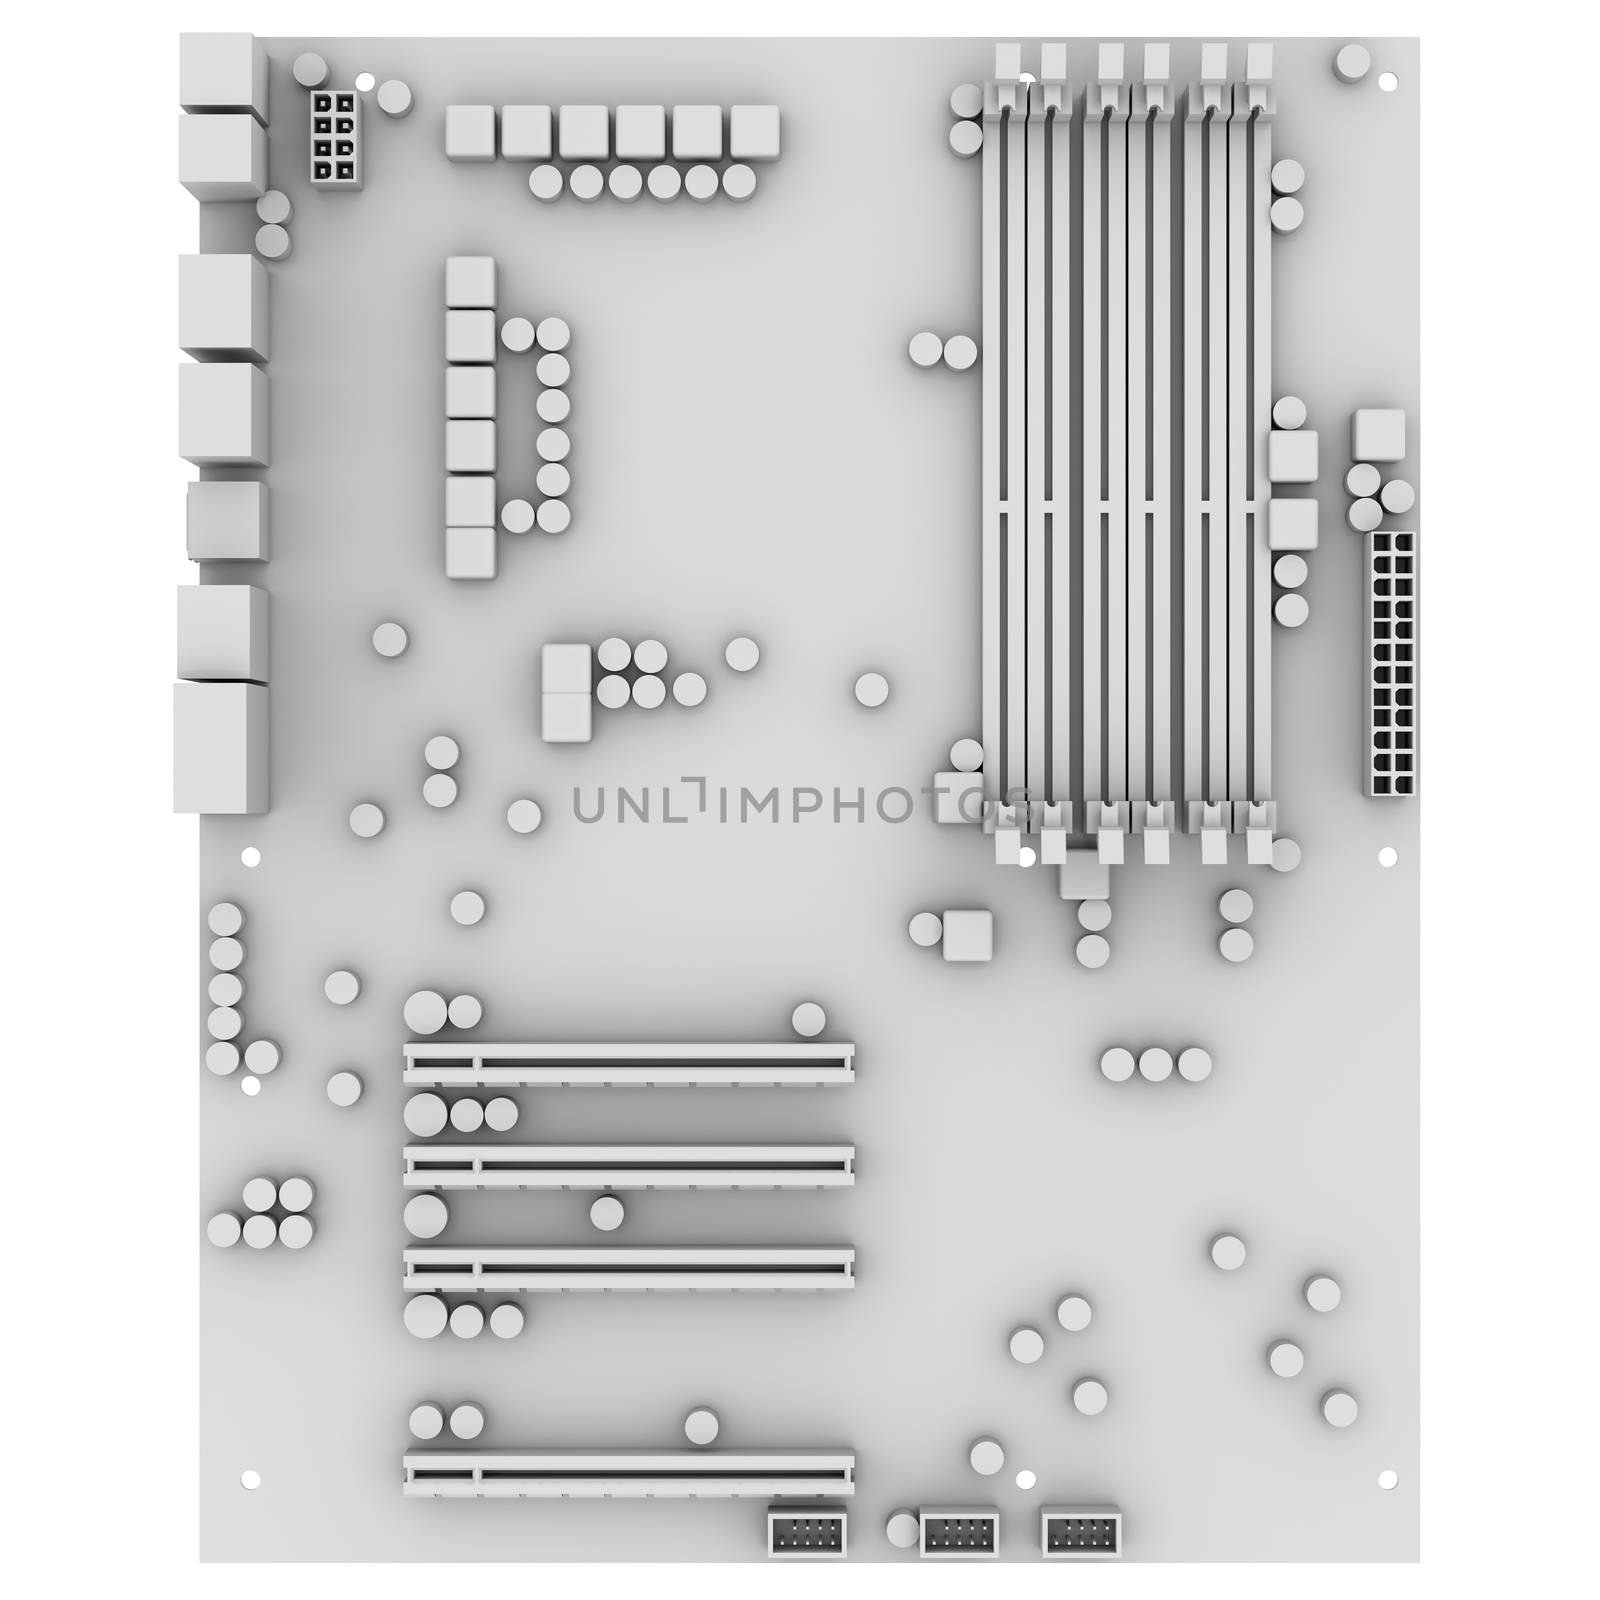 White motherboard. Isolated render on the white background